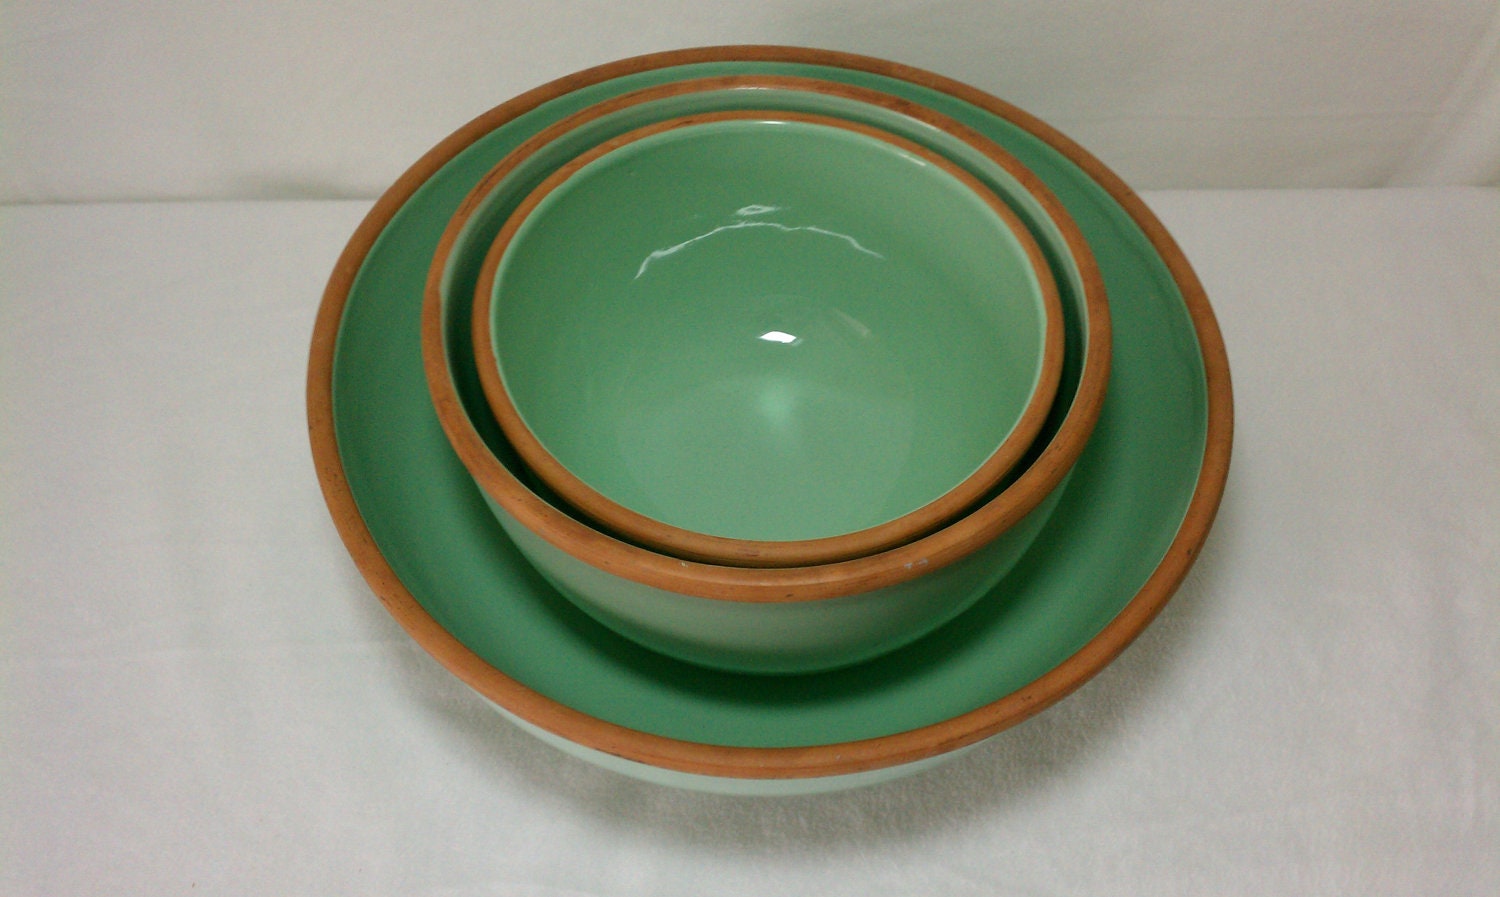 Set of 3 Stoneware Farm Mixing Bowls in Green